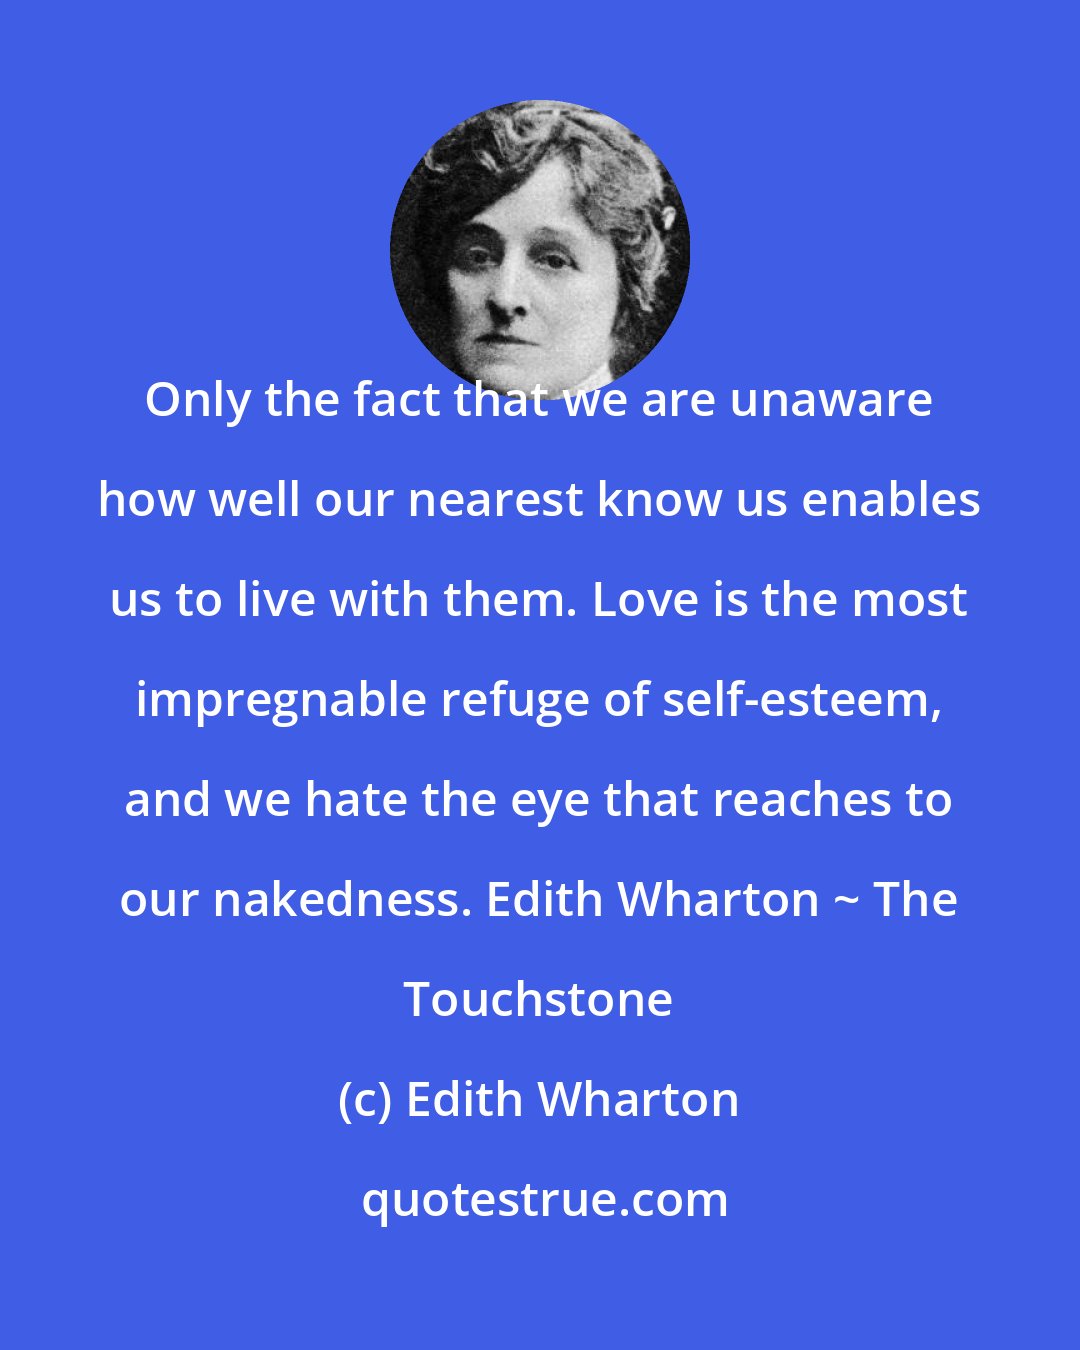 Edith Wharton: Only the fact that we are unaware how well our nearest know us enables us to live with them. Love is the most impregnable refuge of self-esteem, and we hate the eye that reaches to our nakedness. Edith Wharton ~ The Touchstone